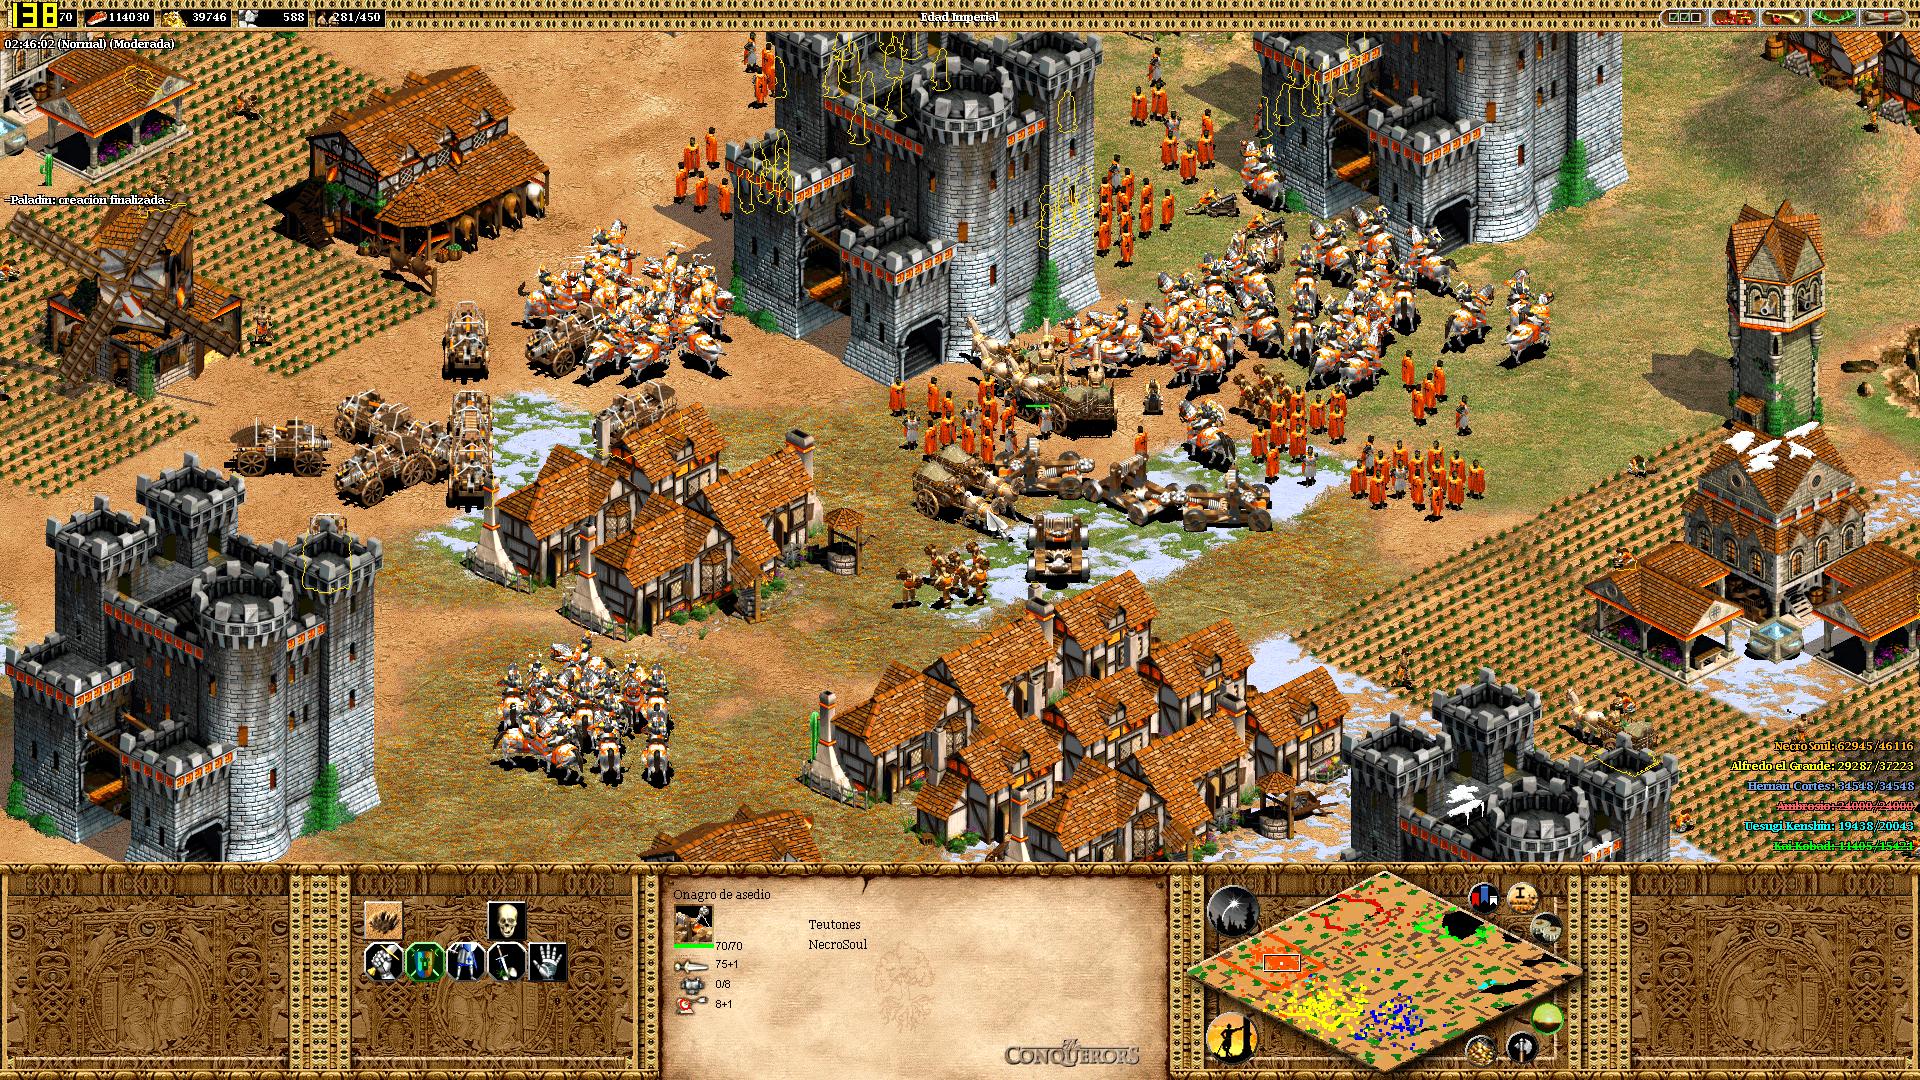 age of empire 2 expansion